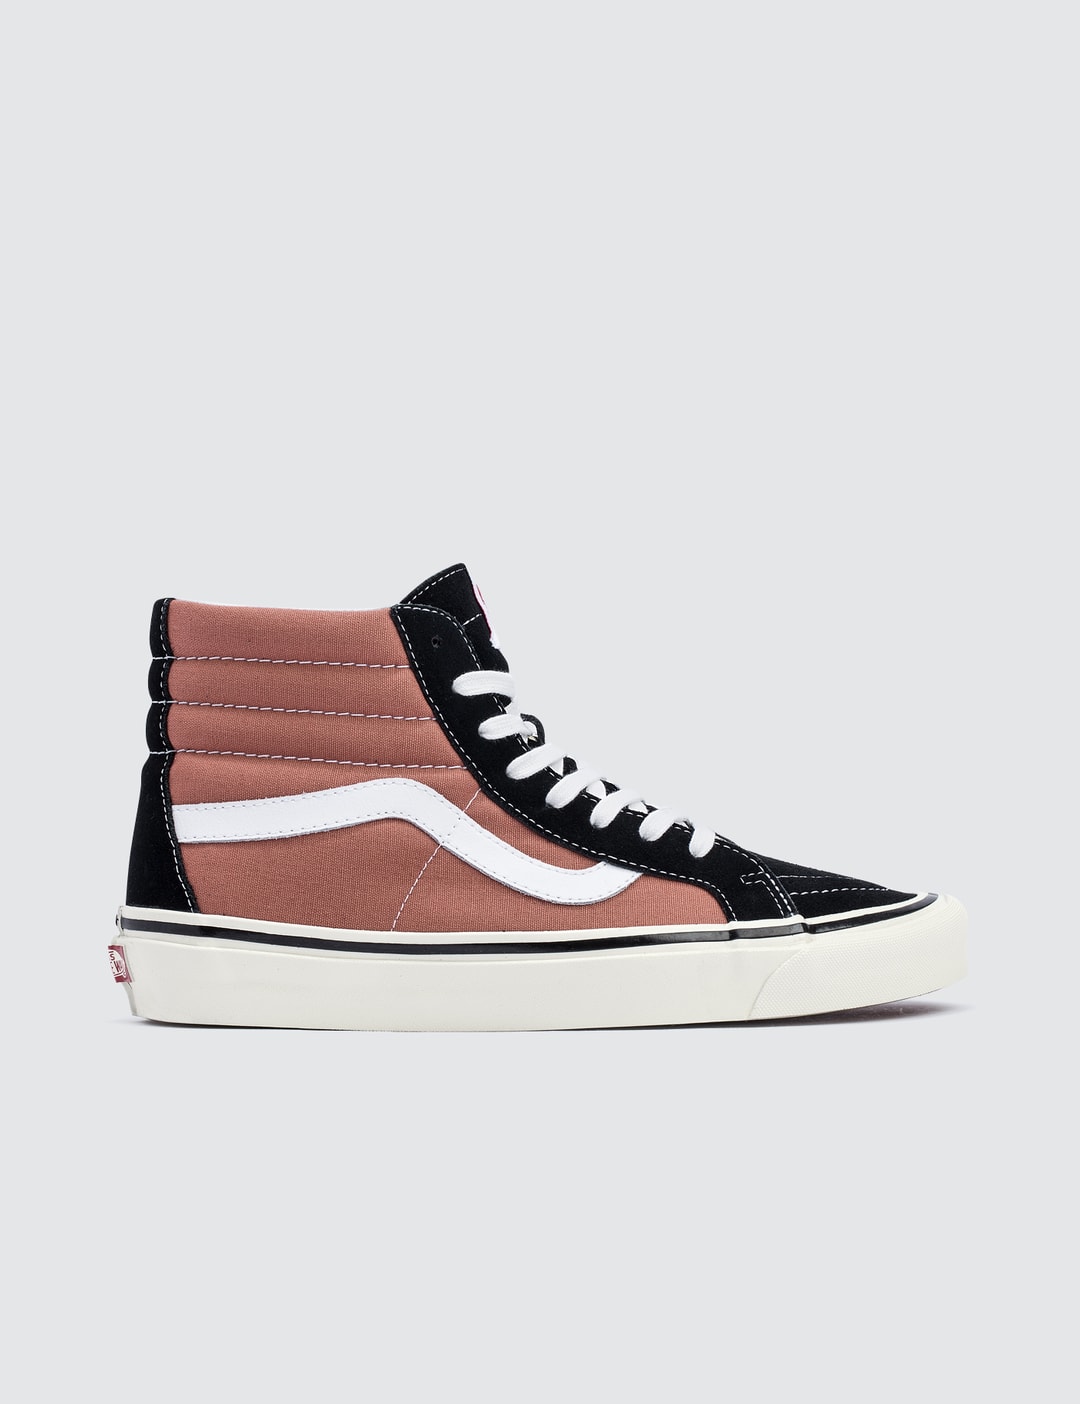 Vans - Sk8-Hi 38 DX | HBX - Globally Curated Fashion and Lifestyle by ...